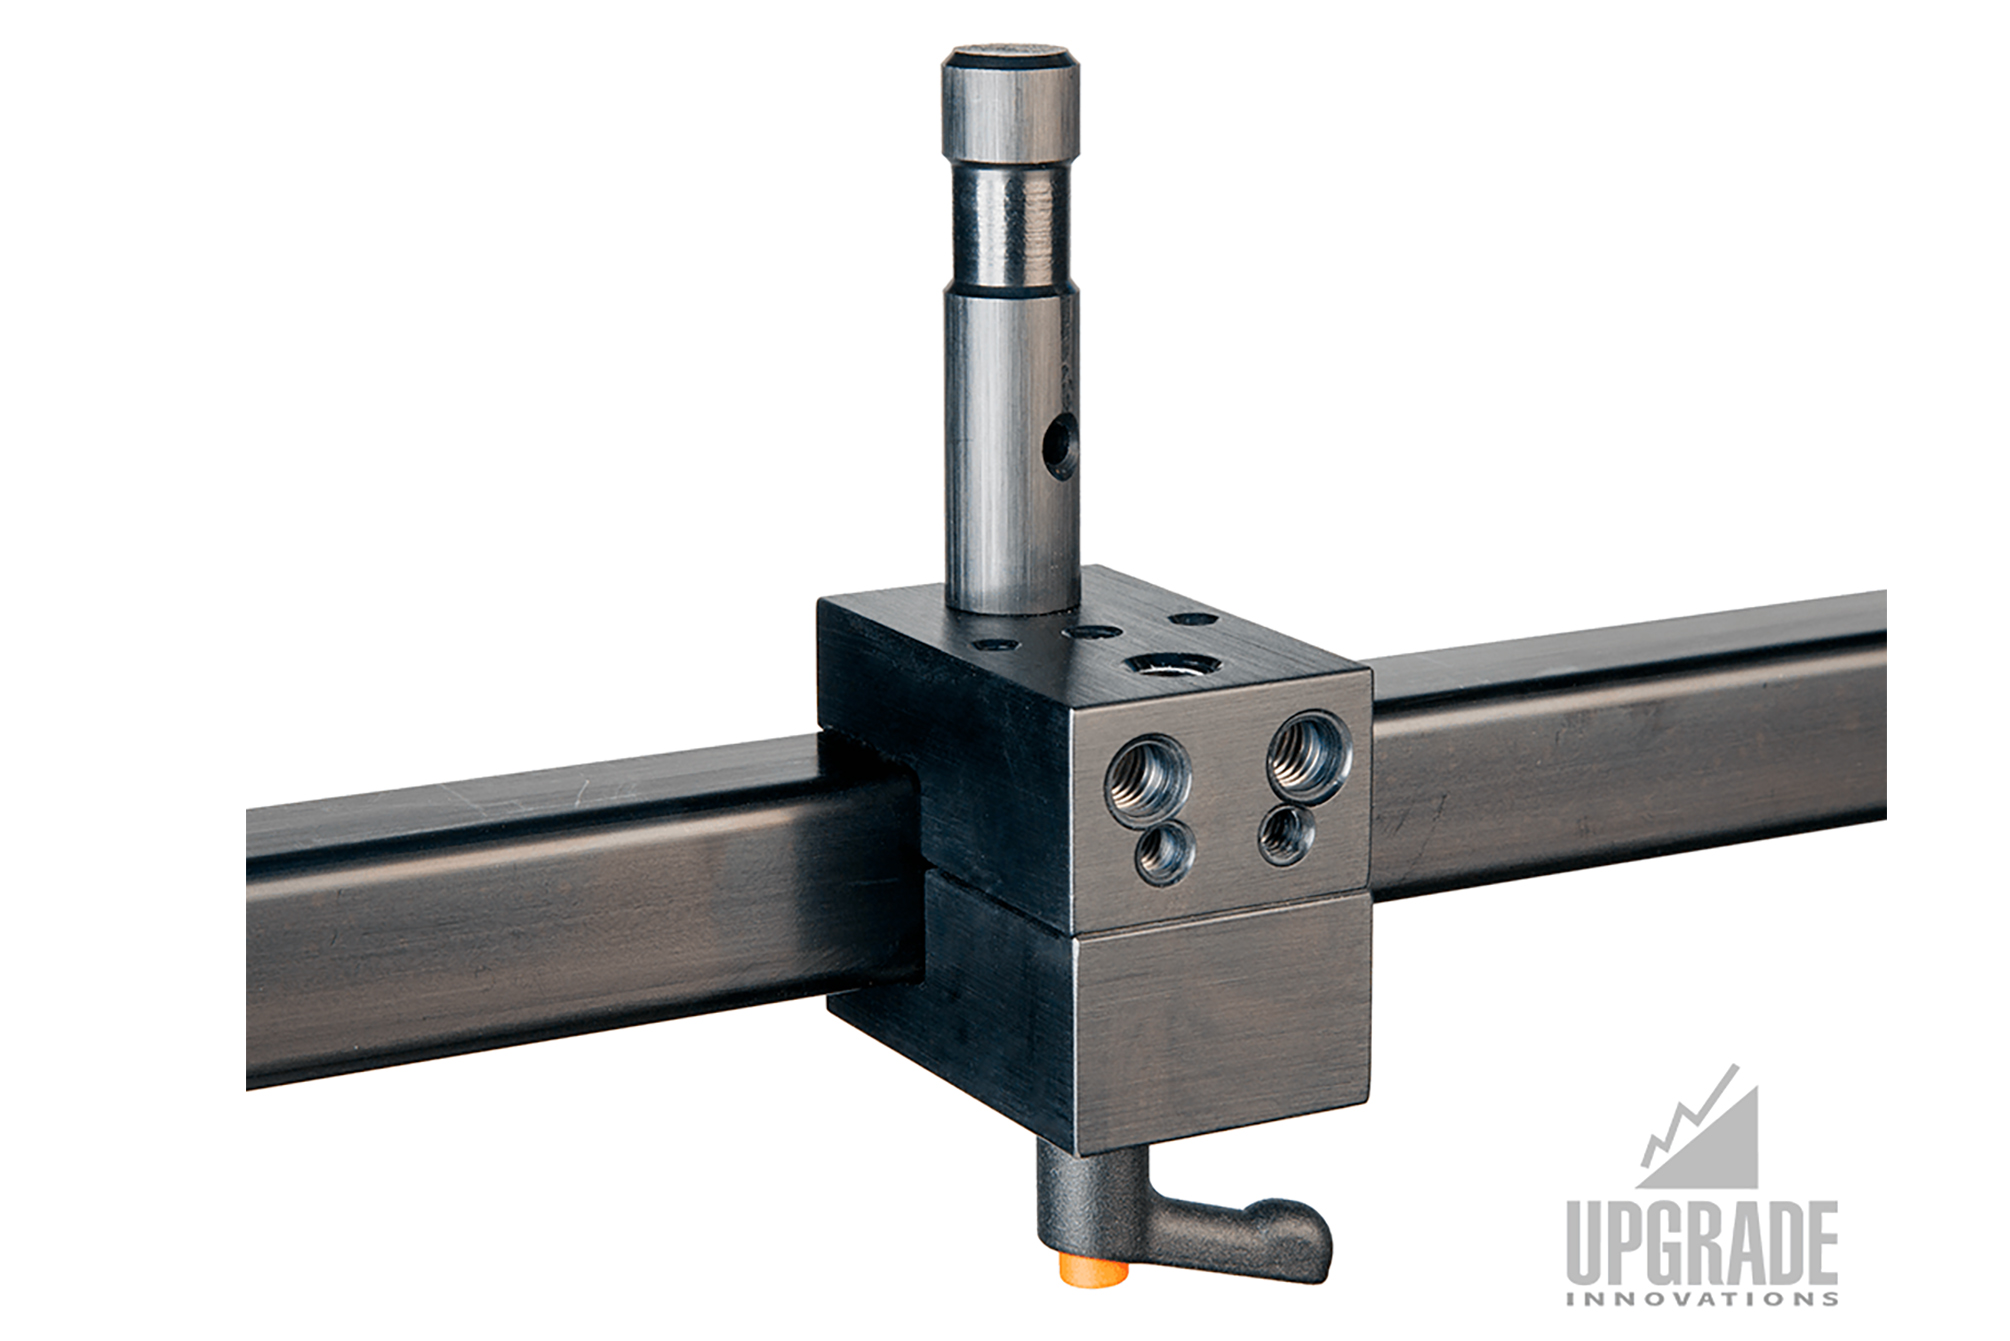 Upgrade Innovations Whaley Rail II – Rail Clamp to 2.5″ Baby Pin